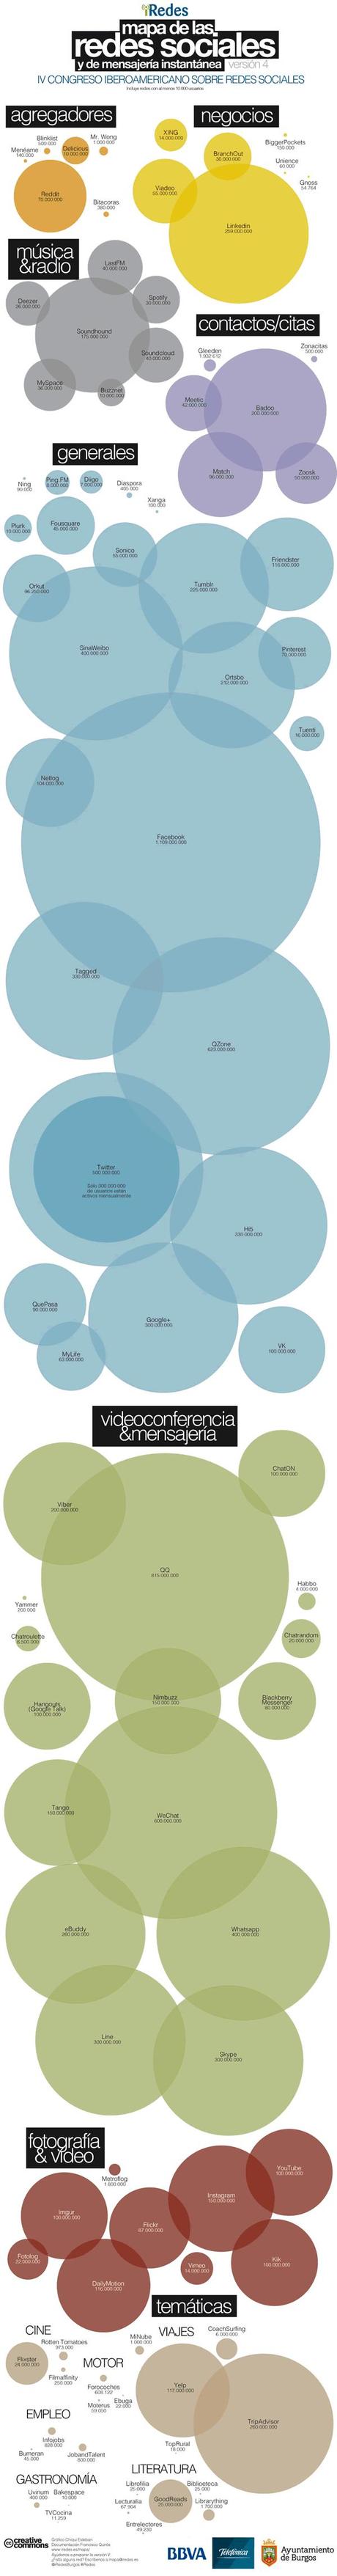 mapa-iredes-iv-2014-redes-sociales